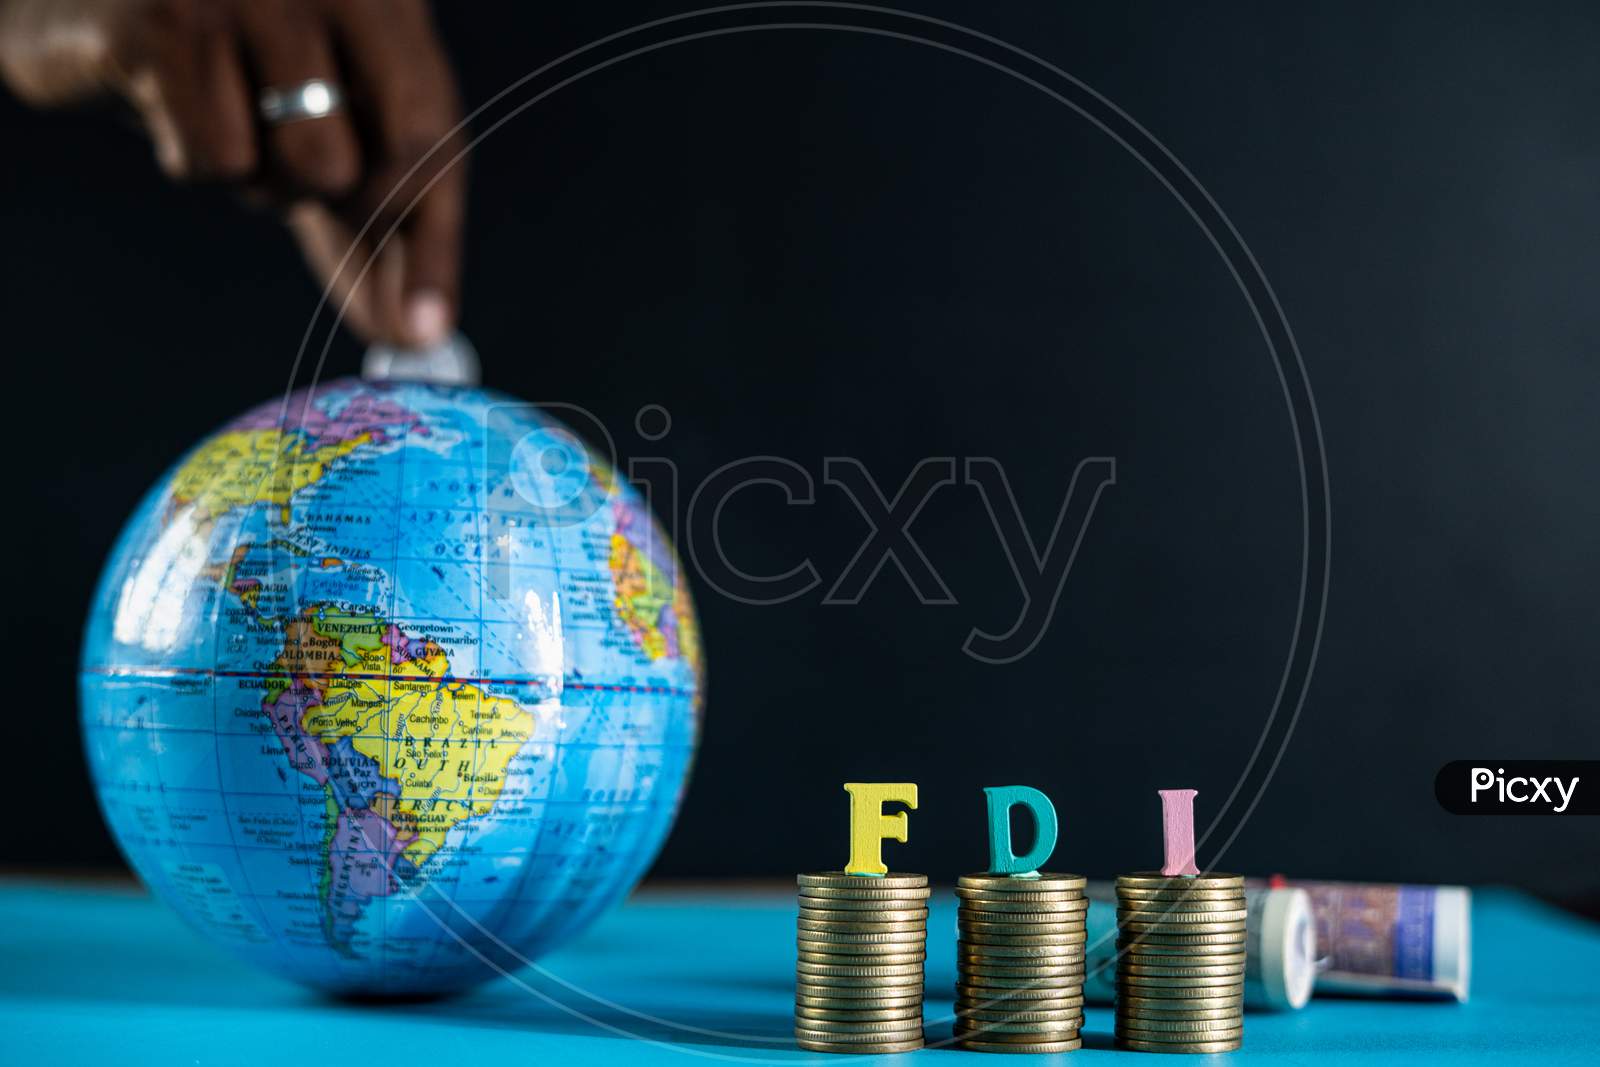 Focus On Fdi Letters On Coins, Concept Of Fdi Or Foreign Direct Investment, Showing By Placing Coins Inside The Globe From Behind.